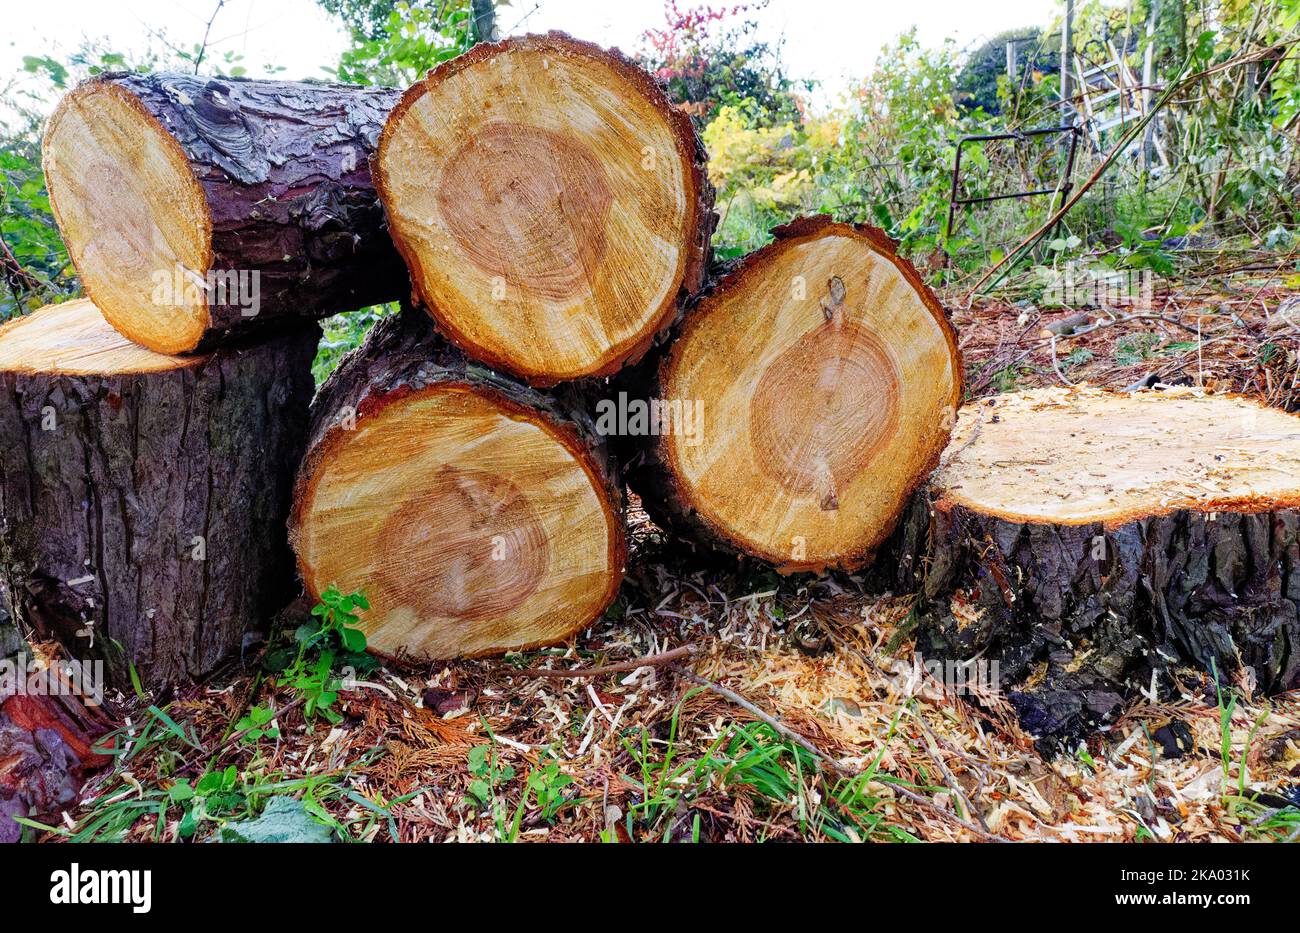 Cut down tree trunk with sawdust and growth rings showing. Stock Photo